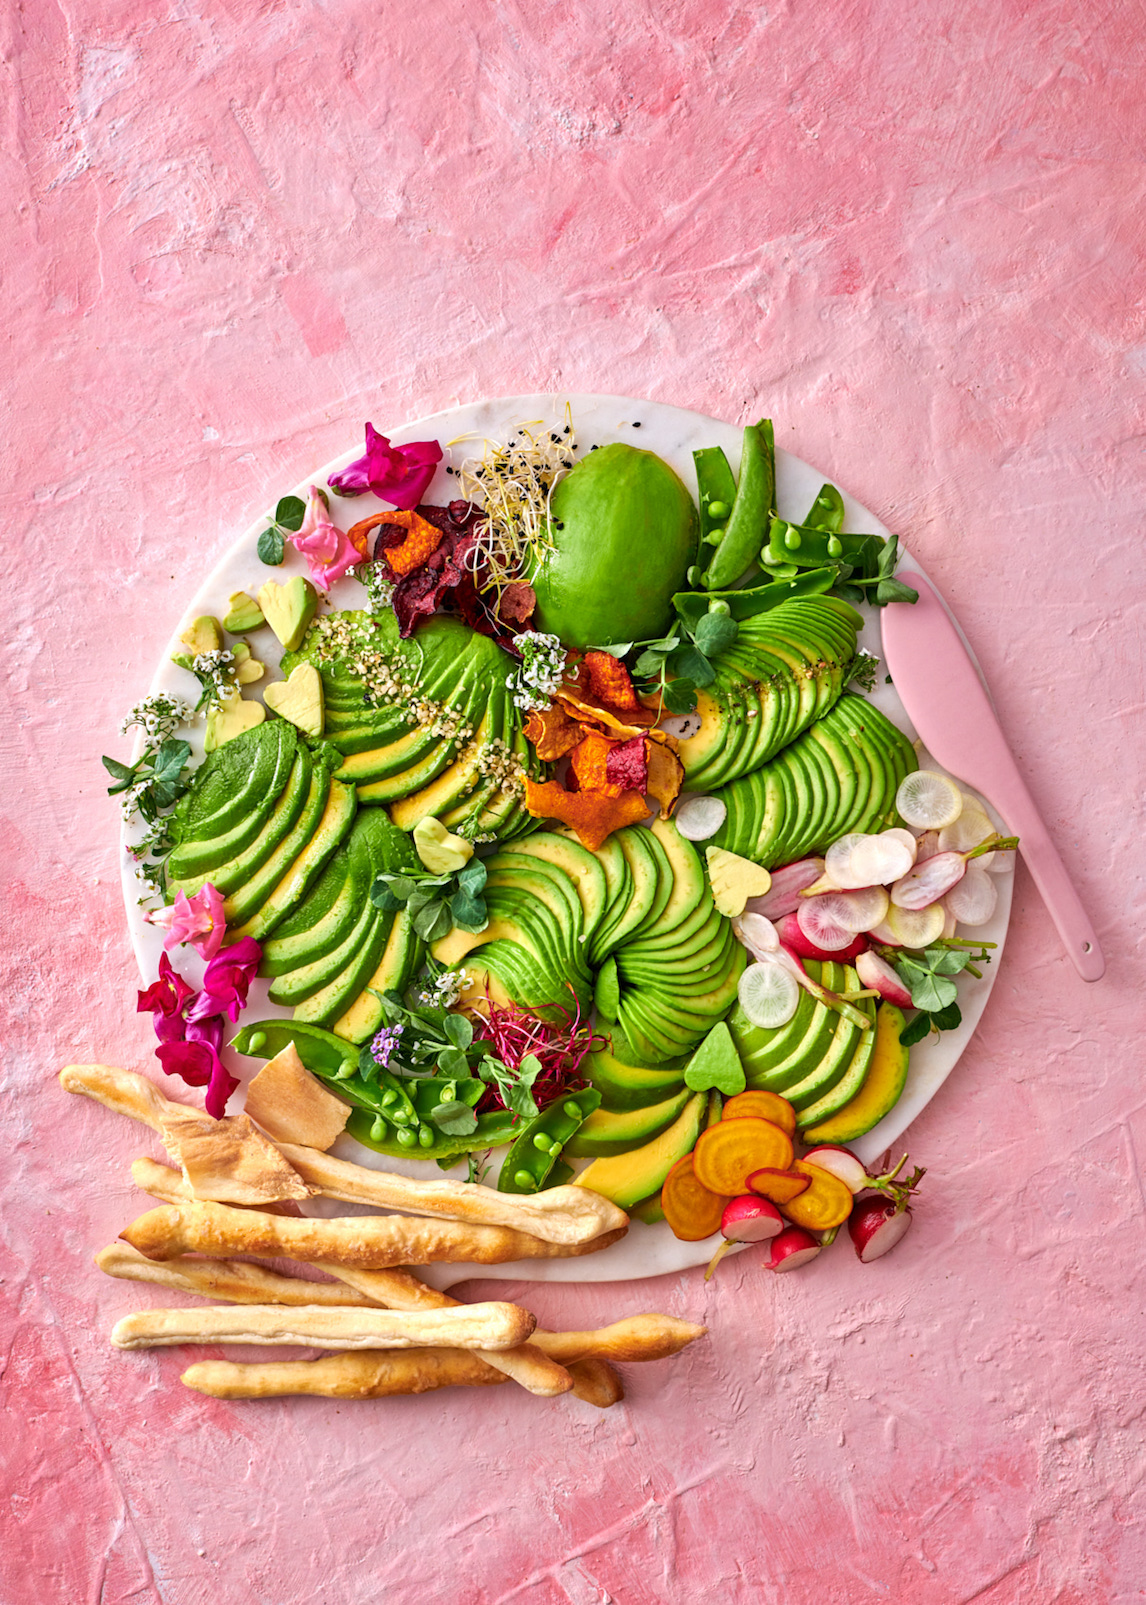 Read more about the article Always-fashionable avocados make the foodie trends A-list for 2019